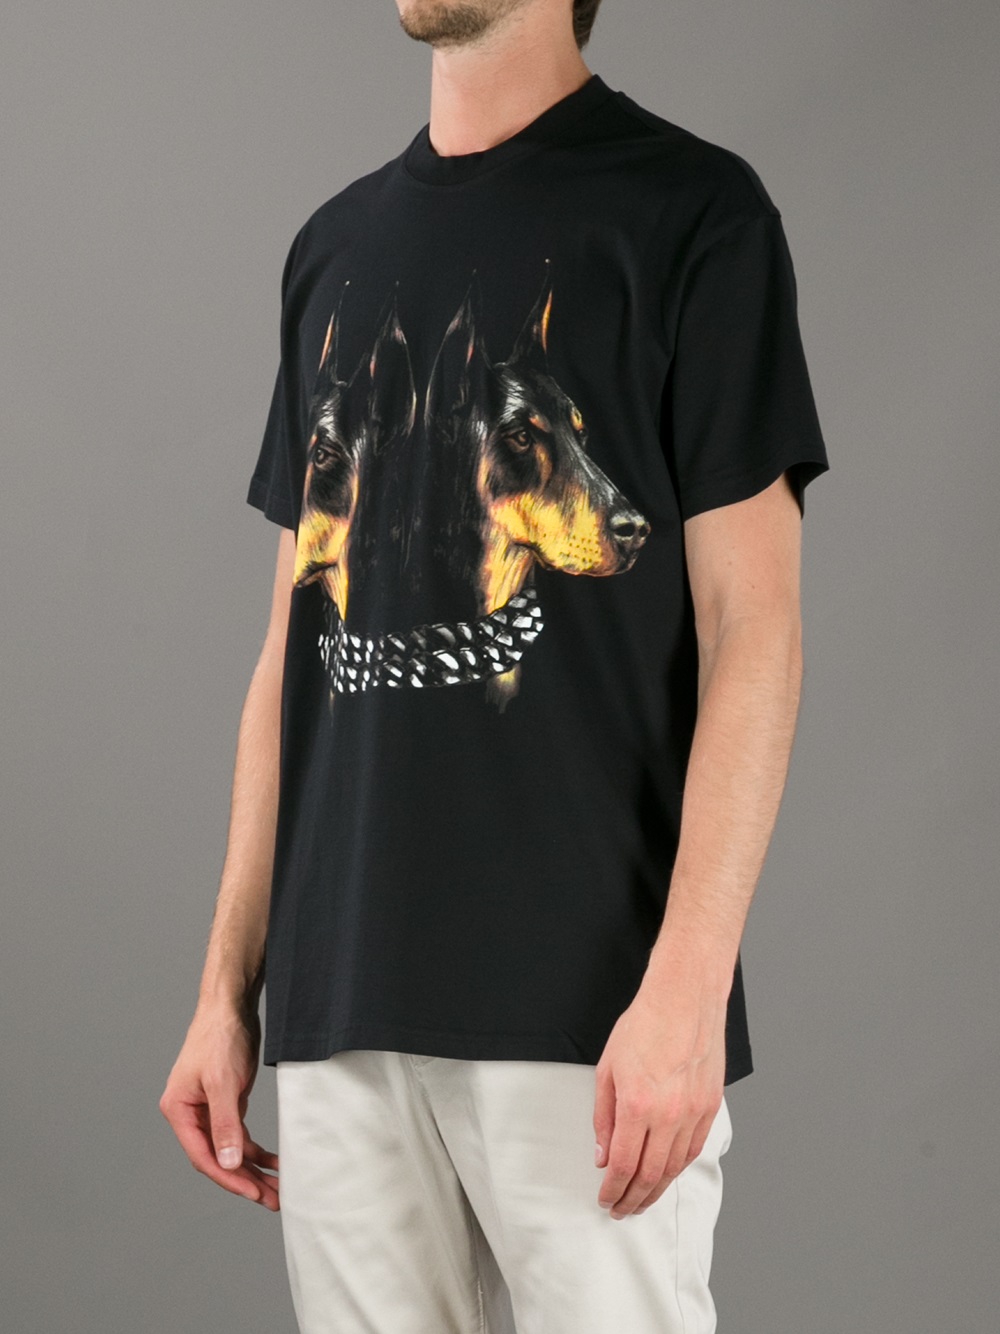 Givenchy Dog Printed Tshirt in Black for Men - Lyst